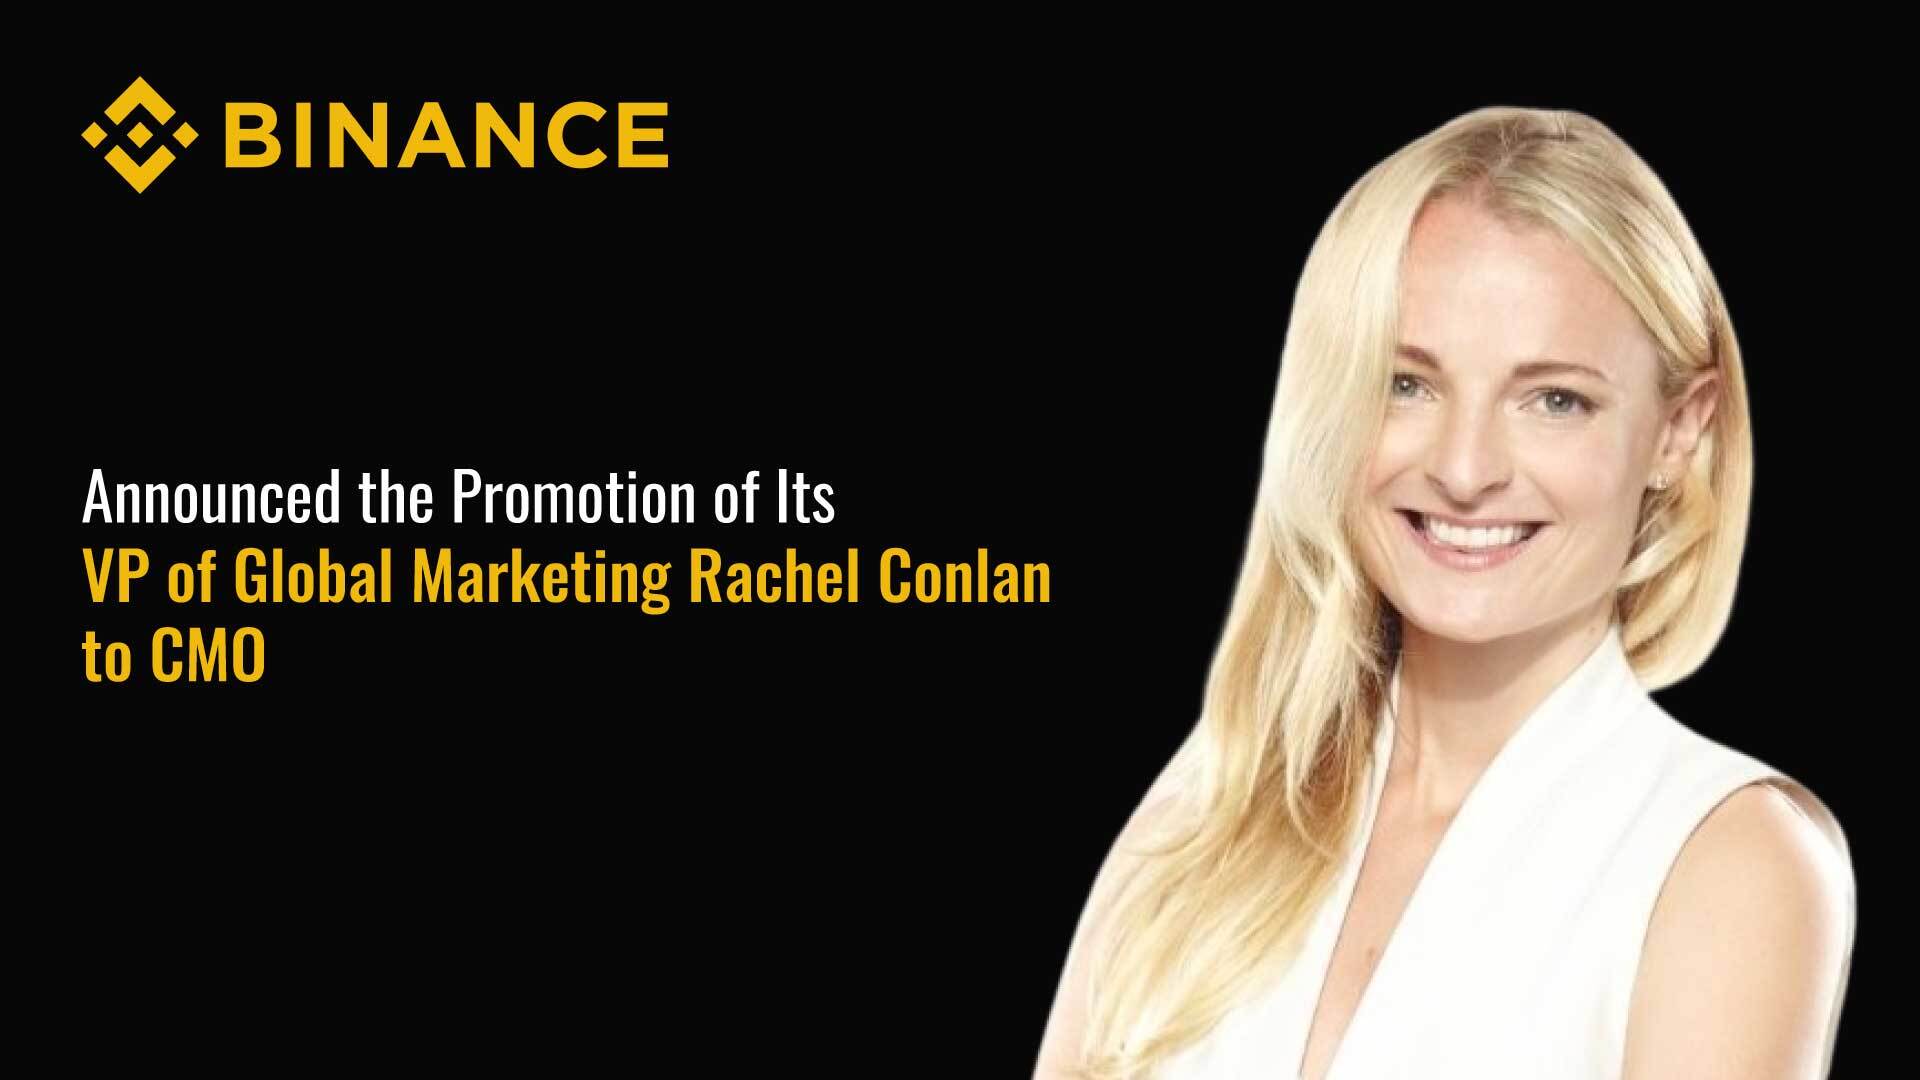 Binance Announces Rachel Conlan as Chief Marketing Officer as the Organization Continues to Bring in New Leadership